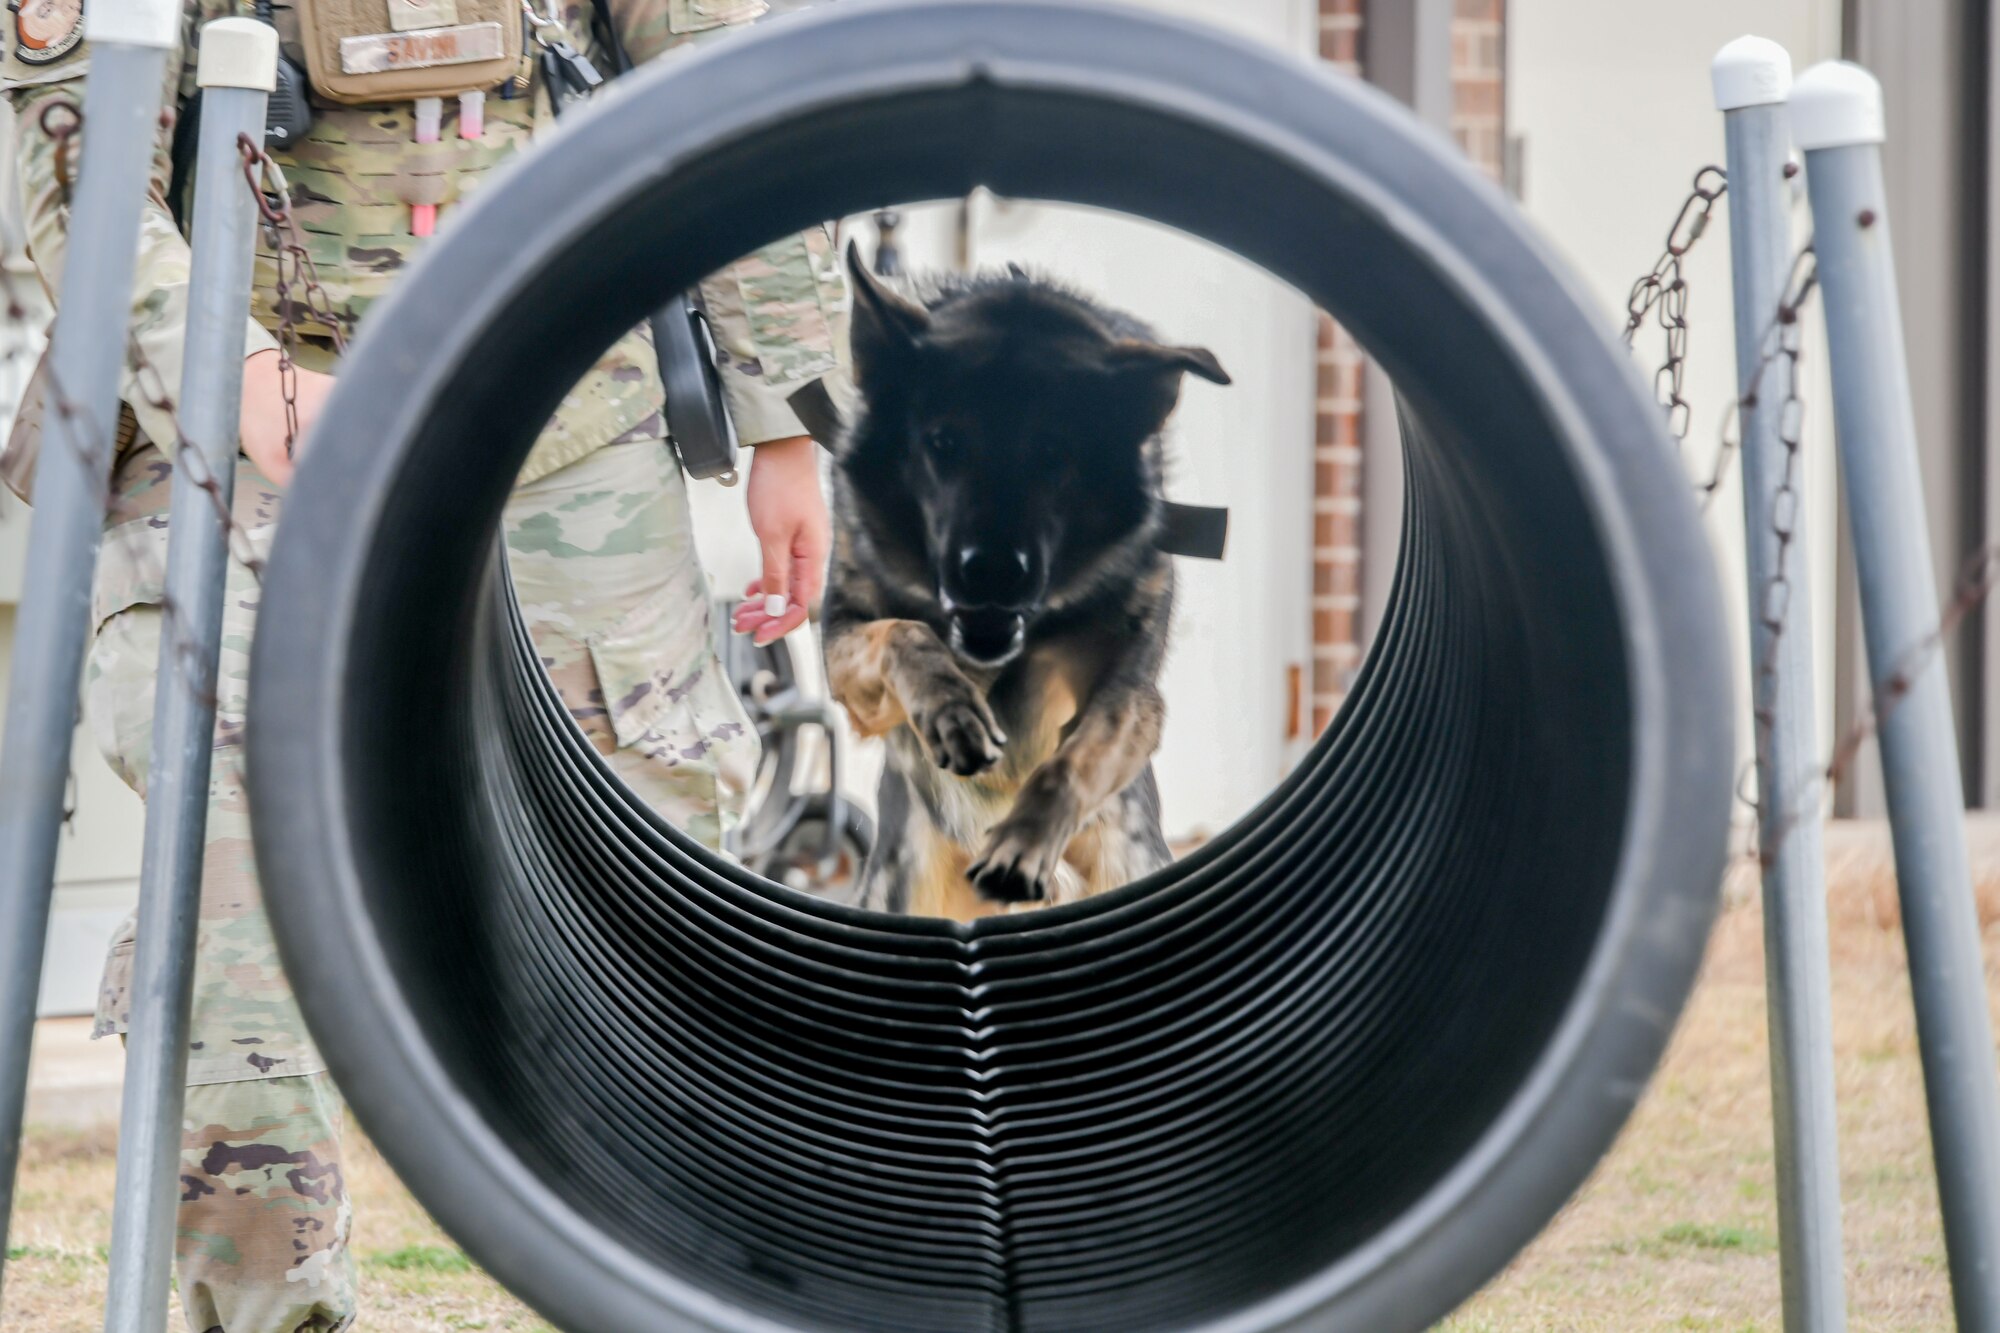 Bingo, 97th Security Forces Squadron military working dog (MWD), runs through a tunnel at Altus Air Force Base, Oklahoma, March 6, 2023.  MWD handlers guide dogs through obstacle courses to prepare them for real-life scenarios. (U.S. Air Force photo by Airman 1st Class Miyah Gray)